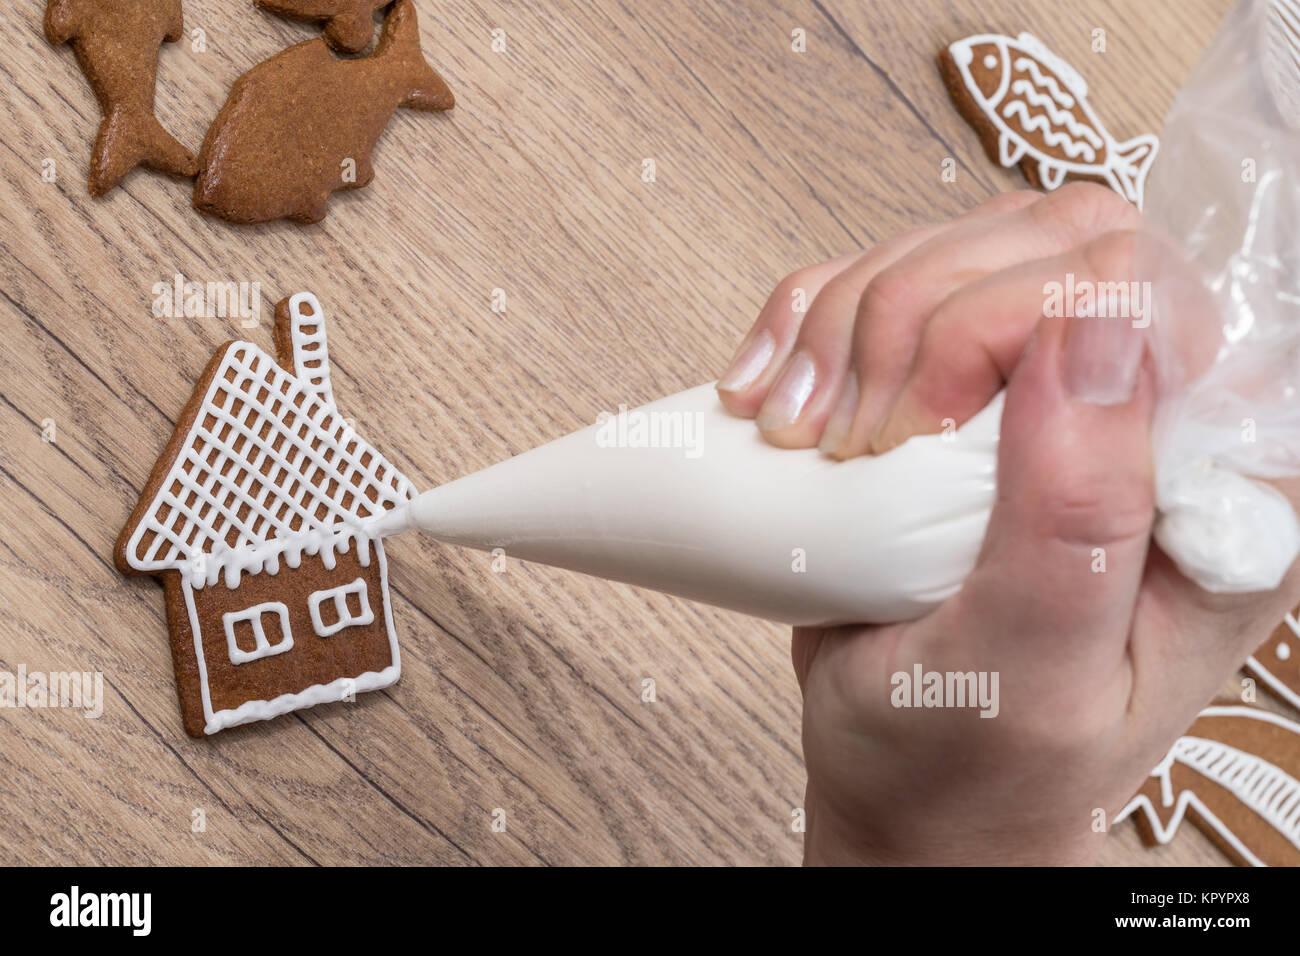 Close-up of female hand while decorating Christmas gingerbread on wood. The woman is painting the house on biscuit using icing bag with sugar frosting Stock Photo